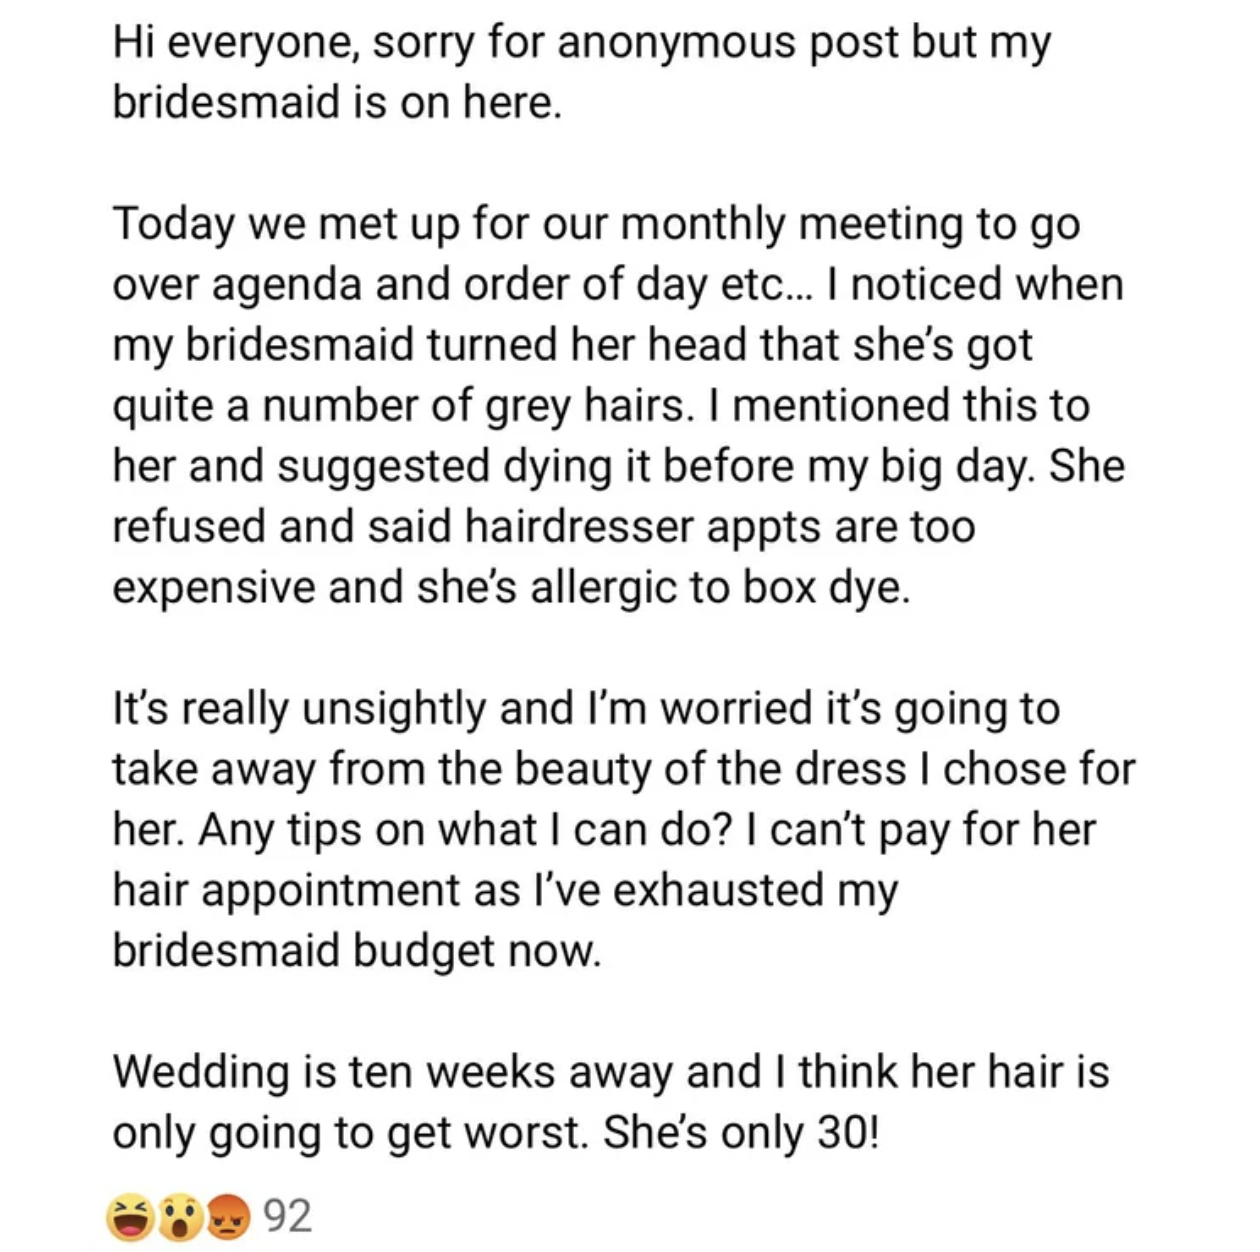 &quot;Wedding is ten weeks away and I think her hair is only going to get worst.&quot;